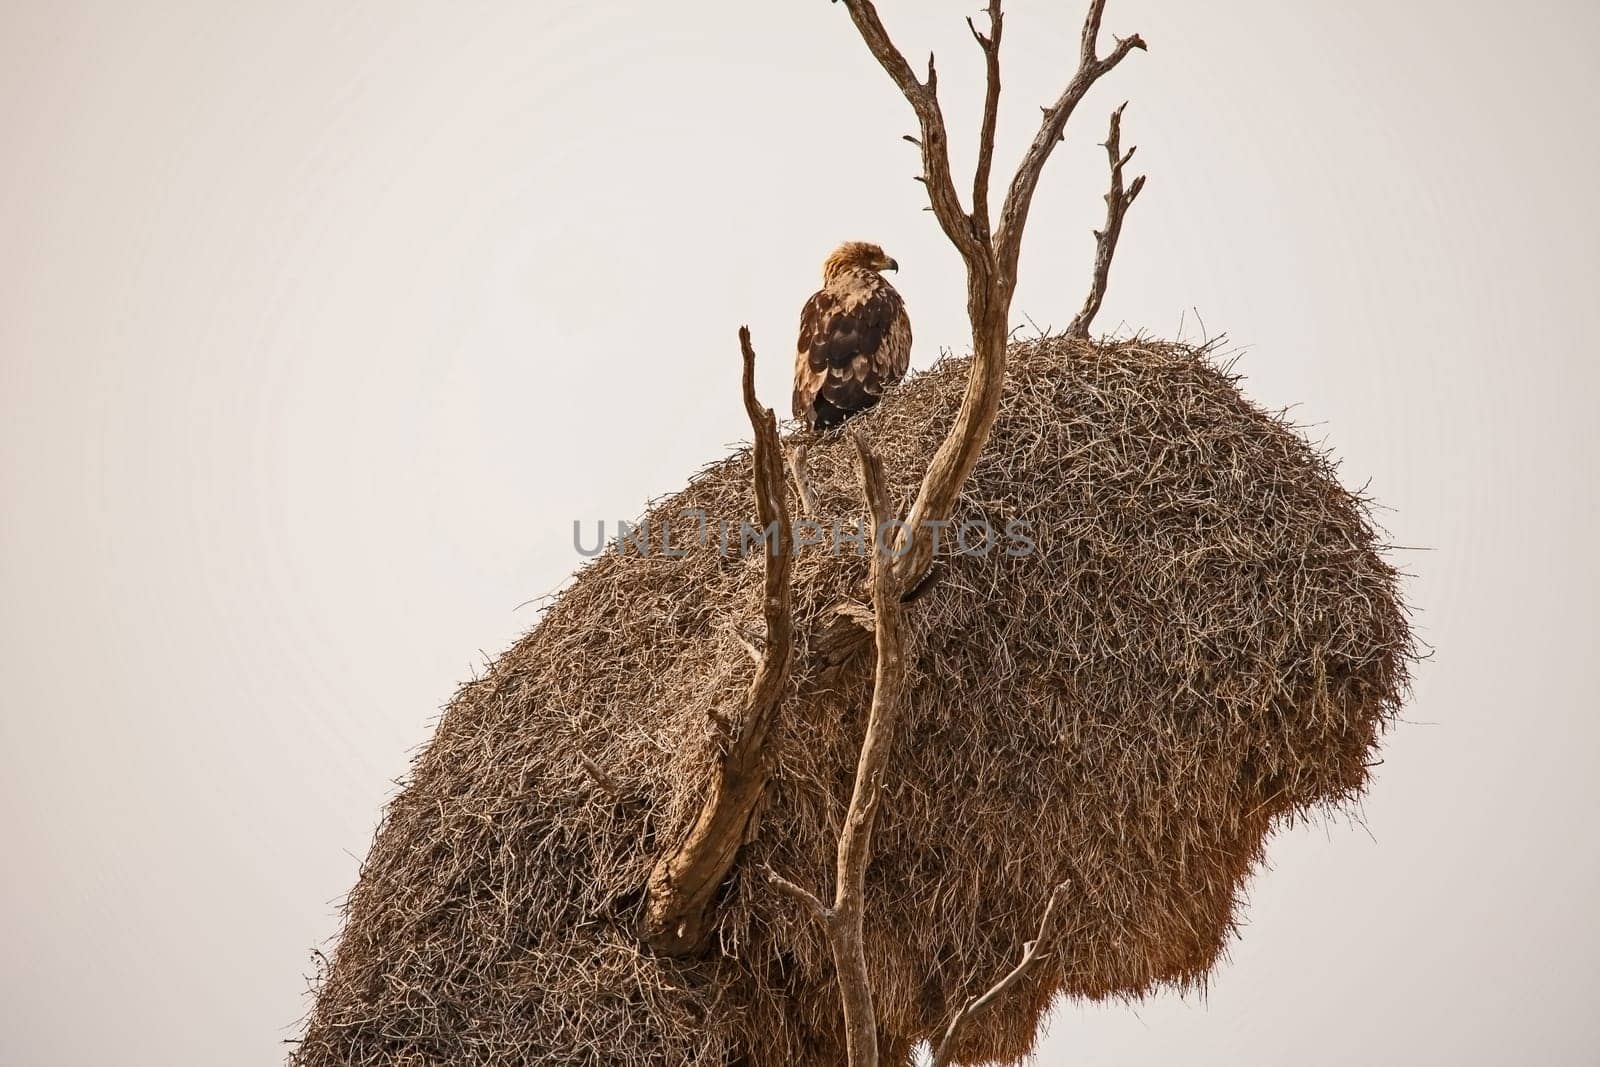 Eagle basking in the early morning sun on top of a Sociable Weaver's nest in the Kgalagadi transfrontier Park. South Africa